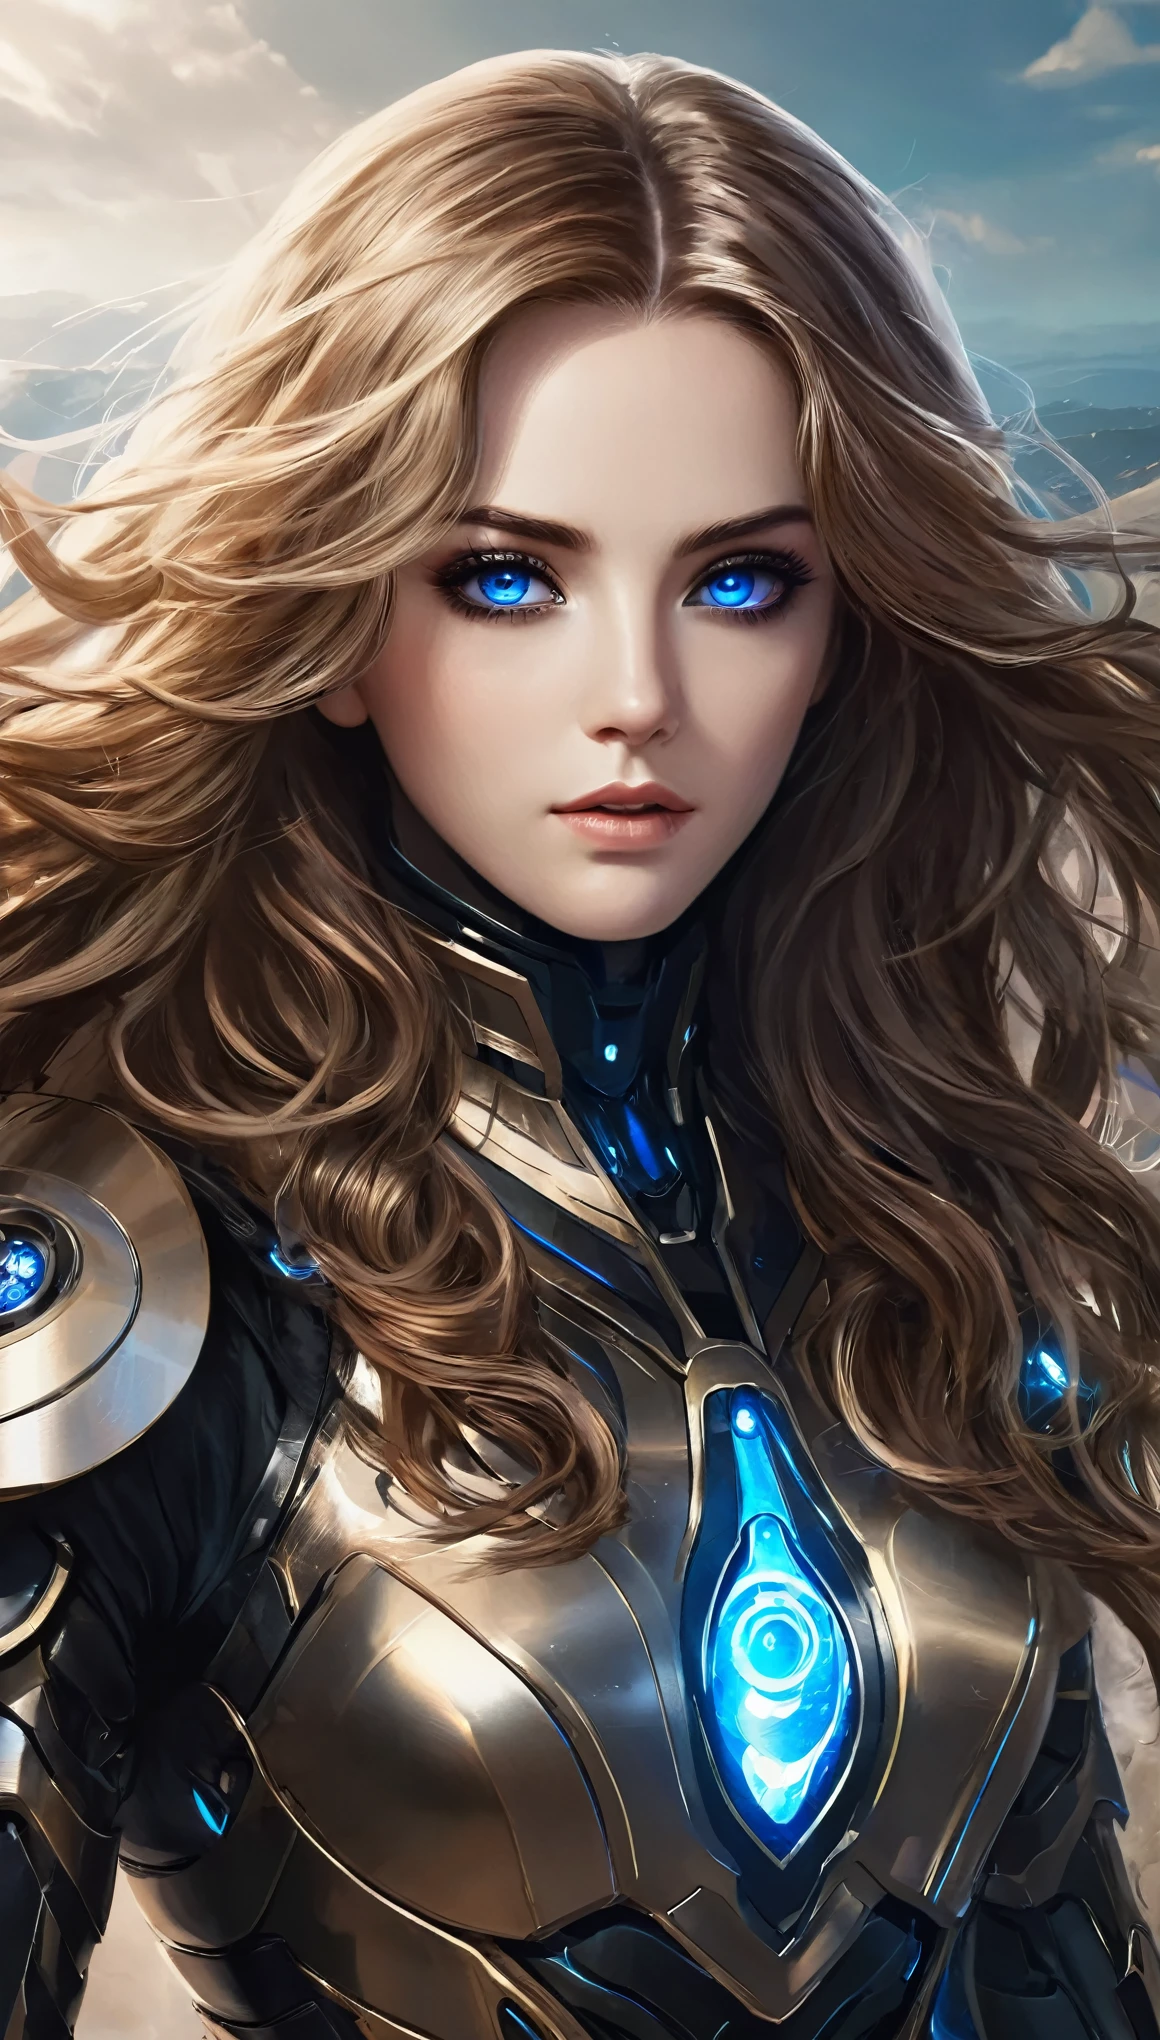 Big black eyes, aura, long wavy hair of light brown color,, Black and blue sci-fi armor, SF wind, high quality, atmosphere, war, beautiful symmetrical face